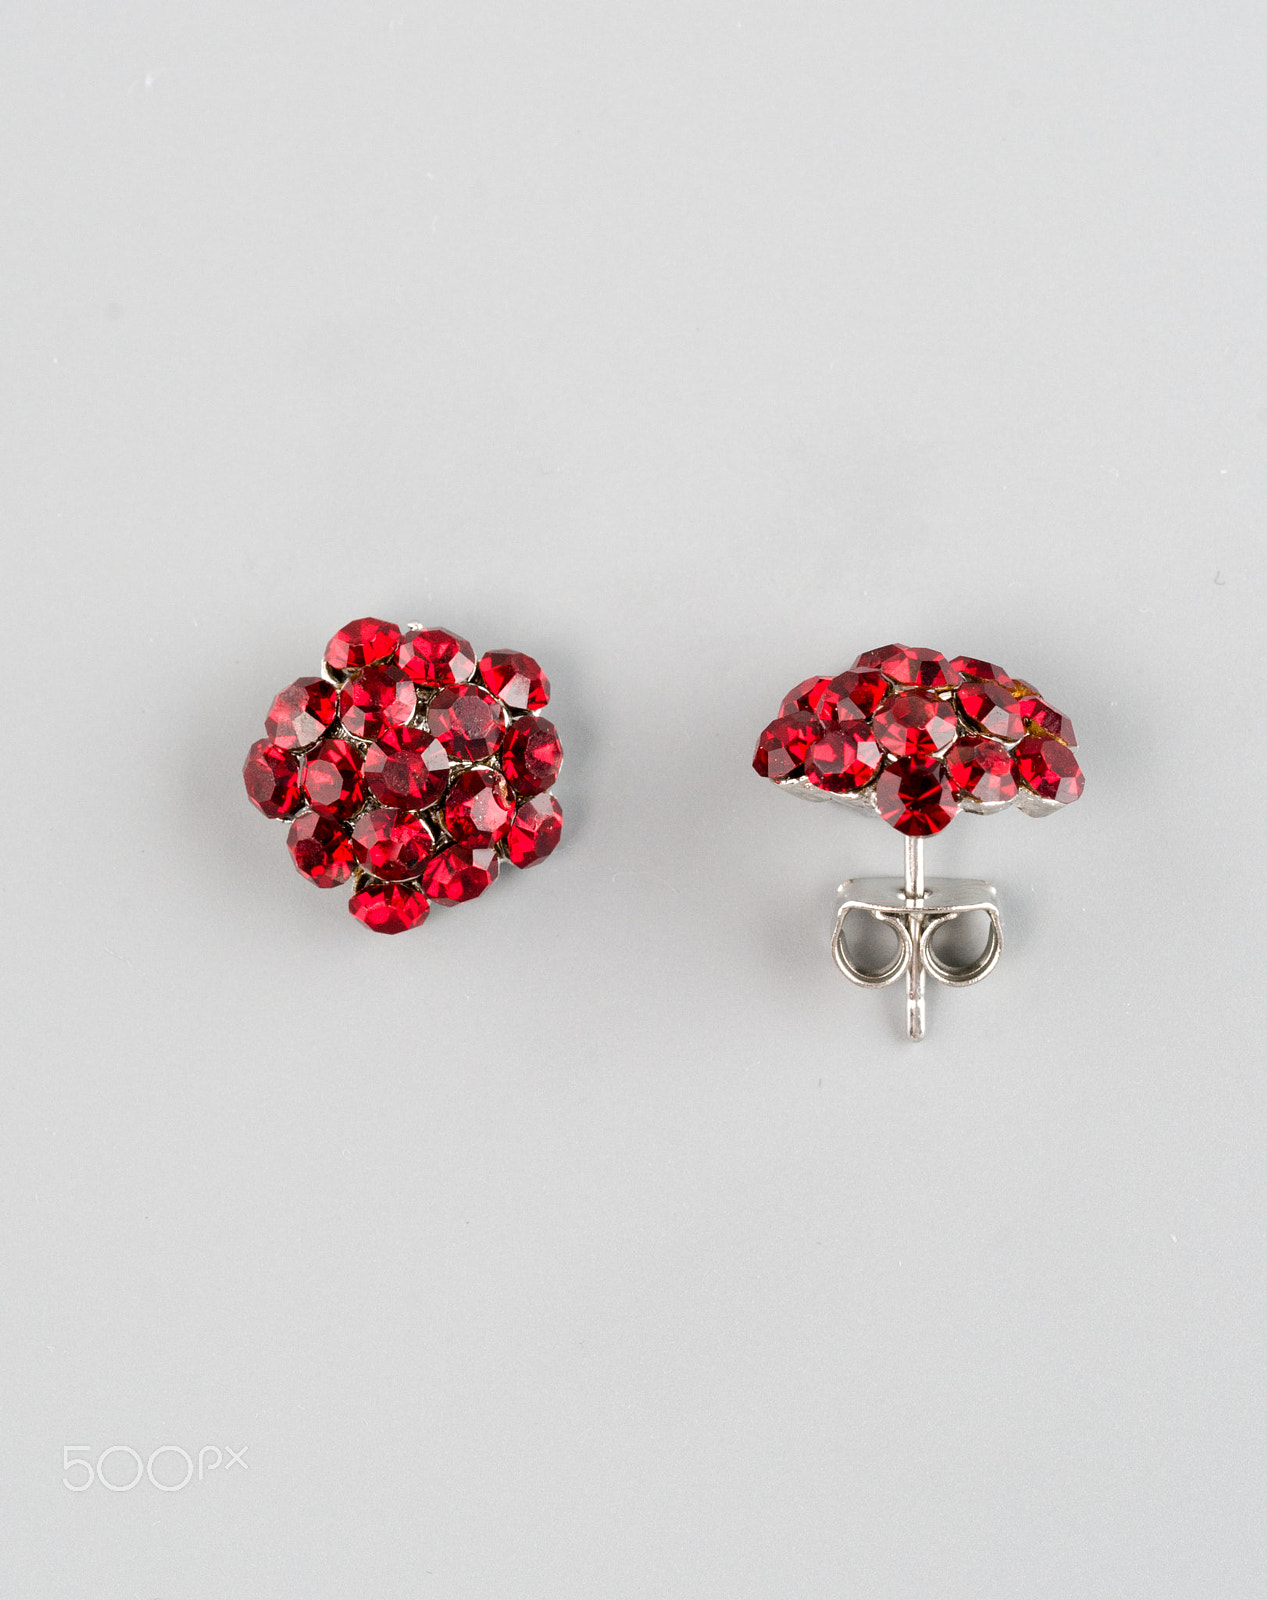 Nikon D300 sample photo. Pair of earrings with gems photography